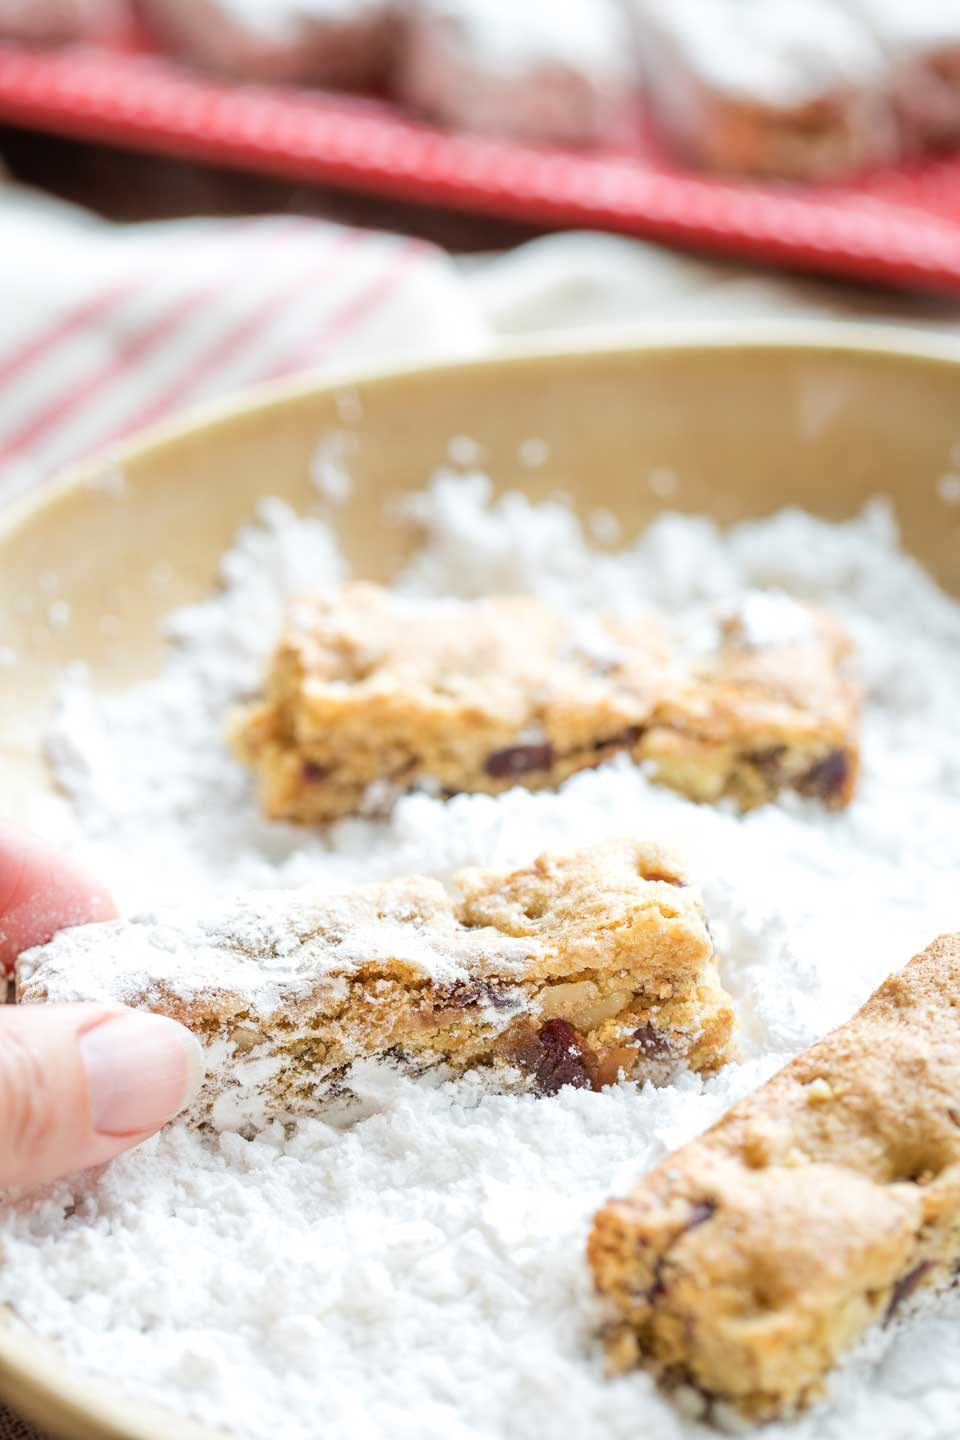 Closeup of three Date Bars in a bowl of powdered sugar, with fingers reaching in to roll one around in it.